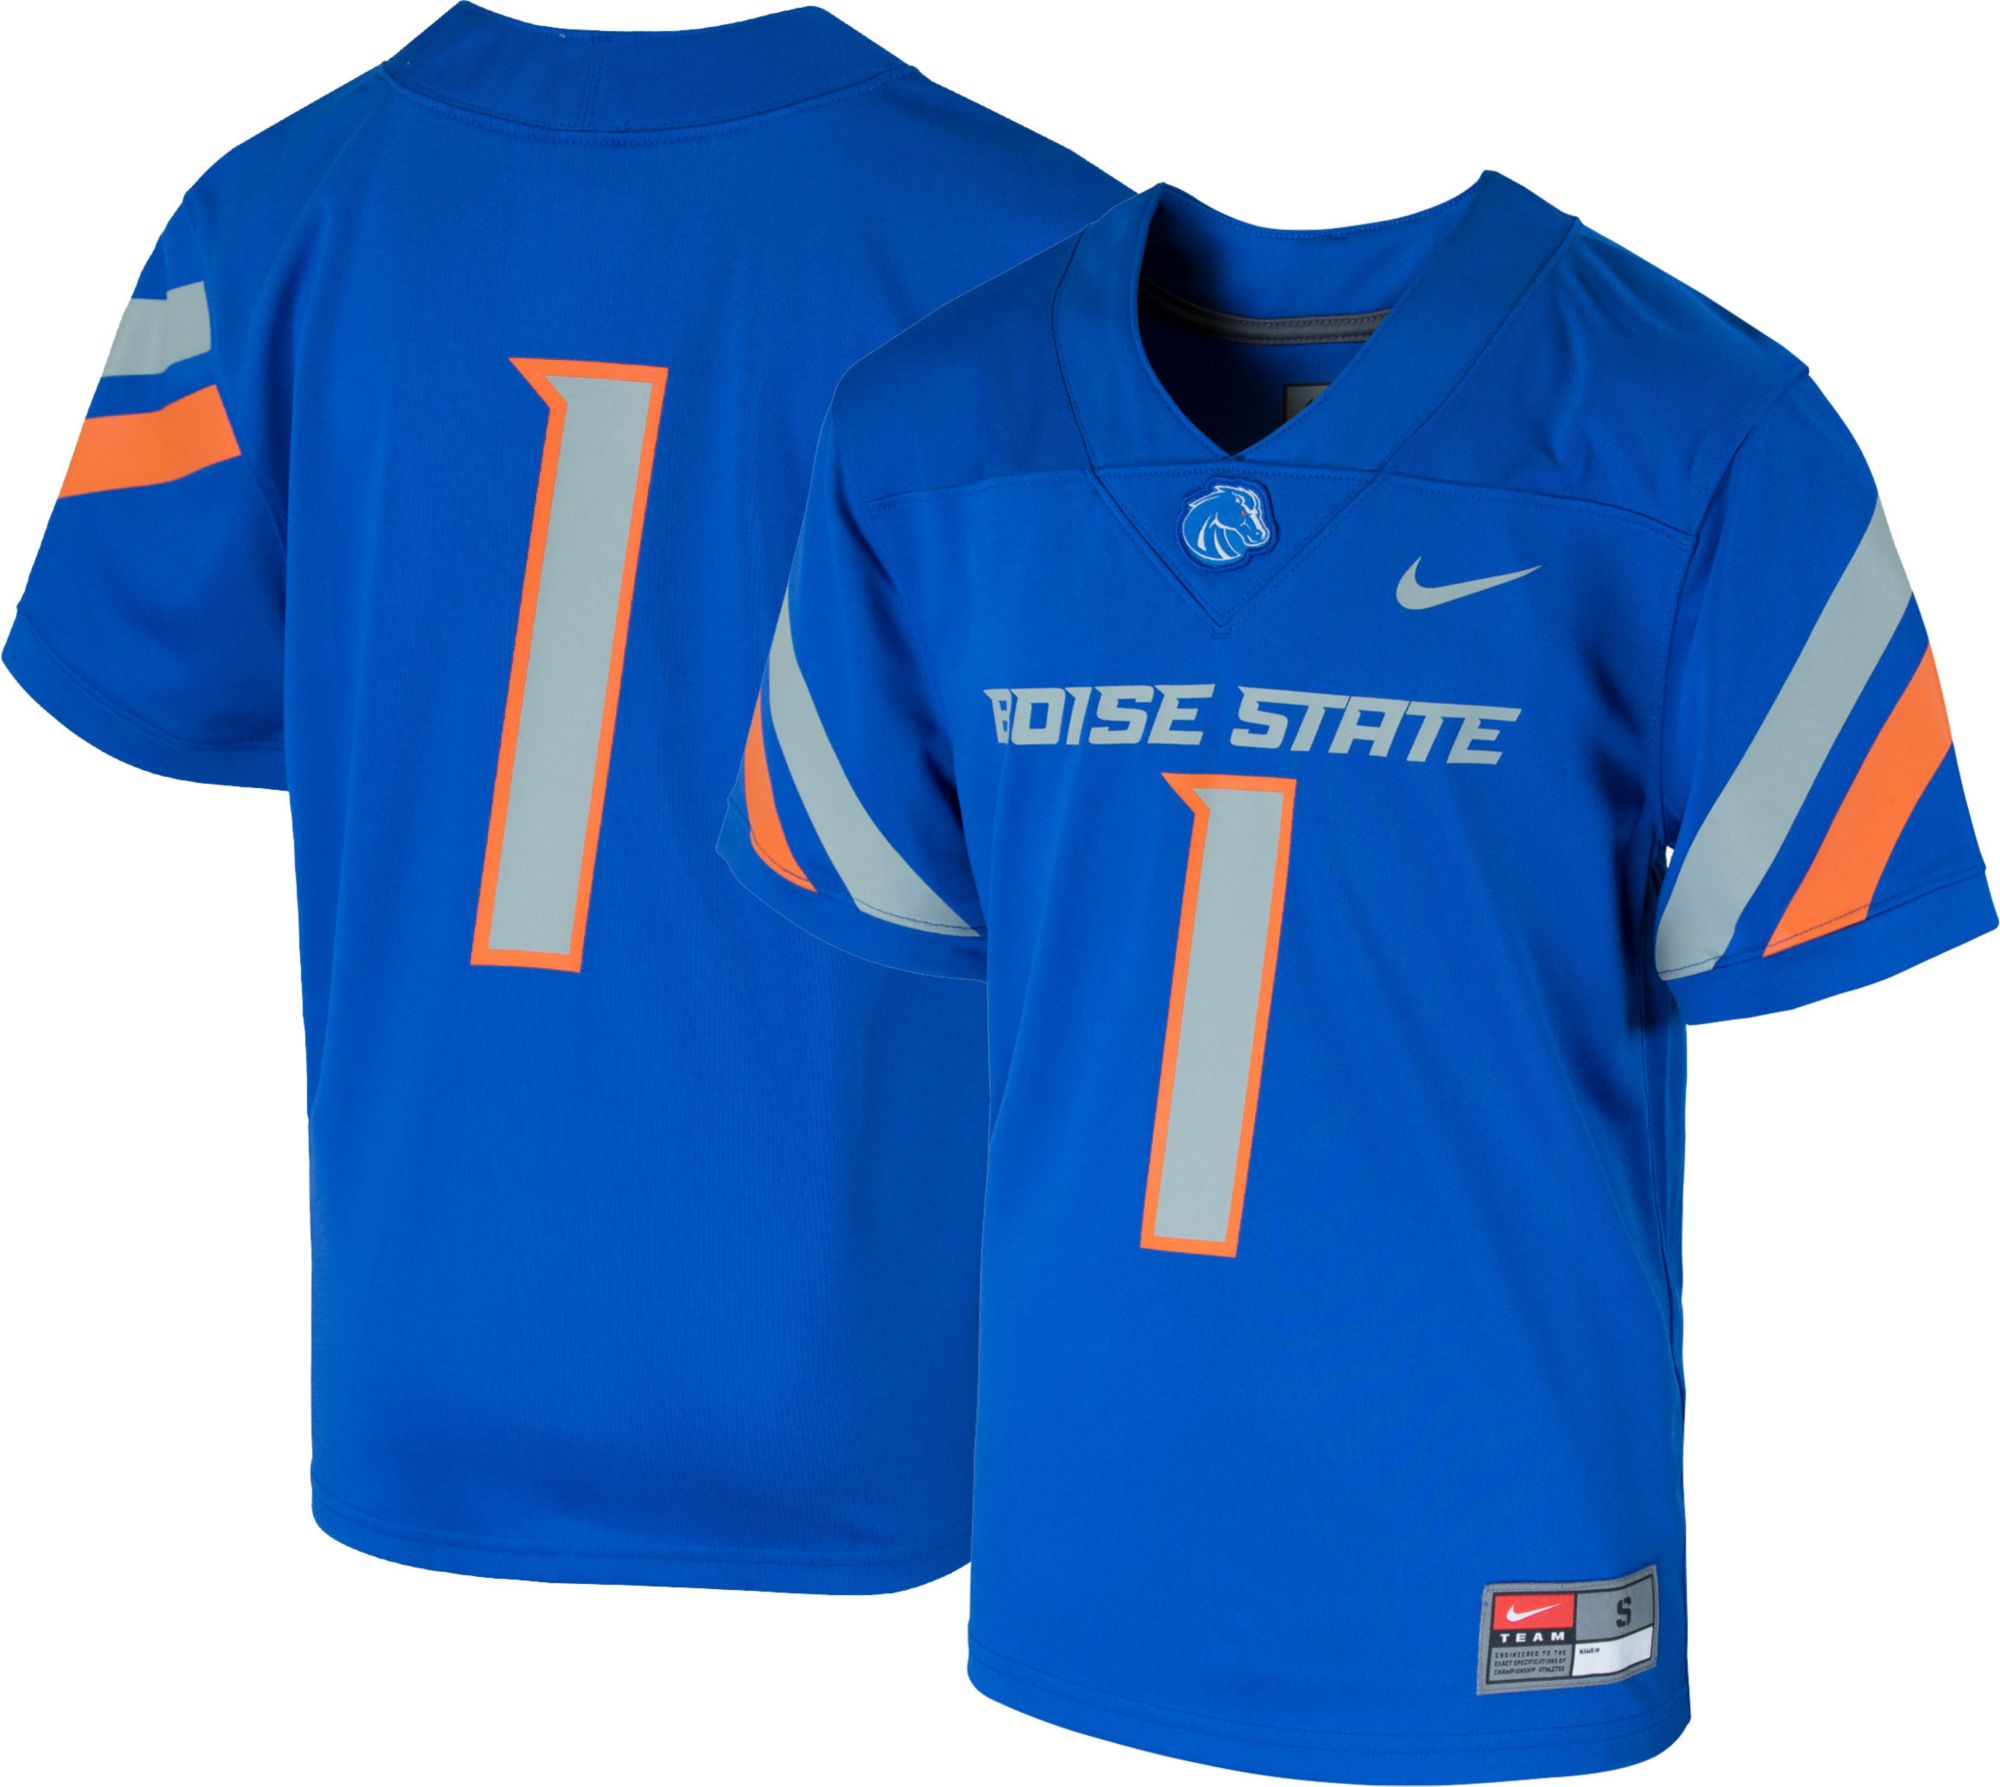 boise state youth football jersey